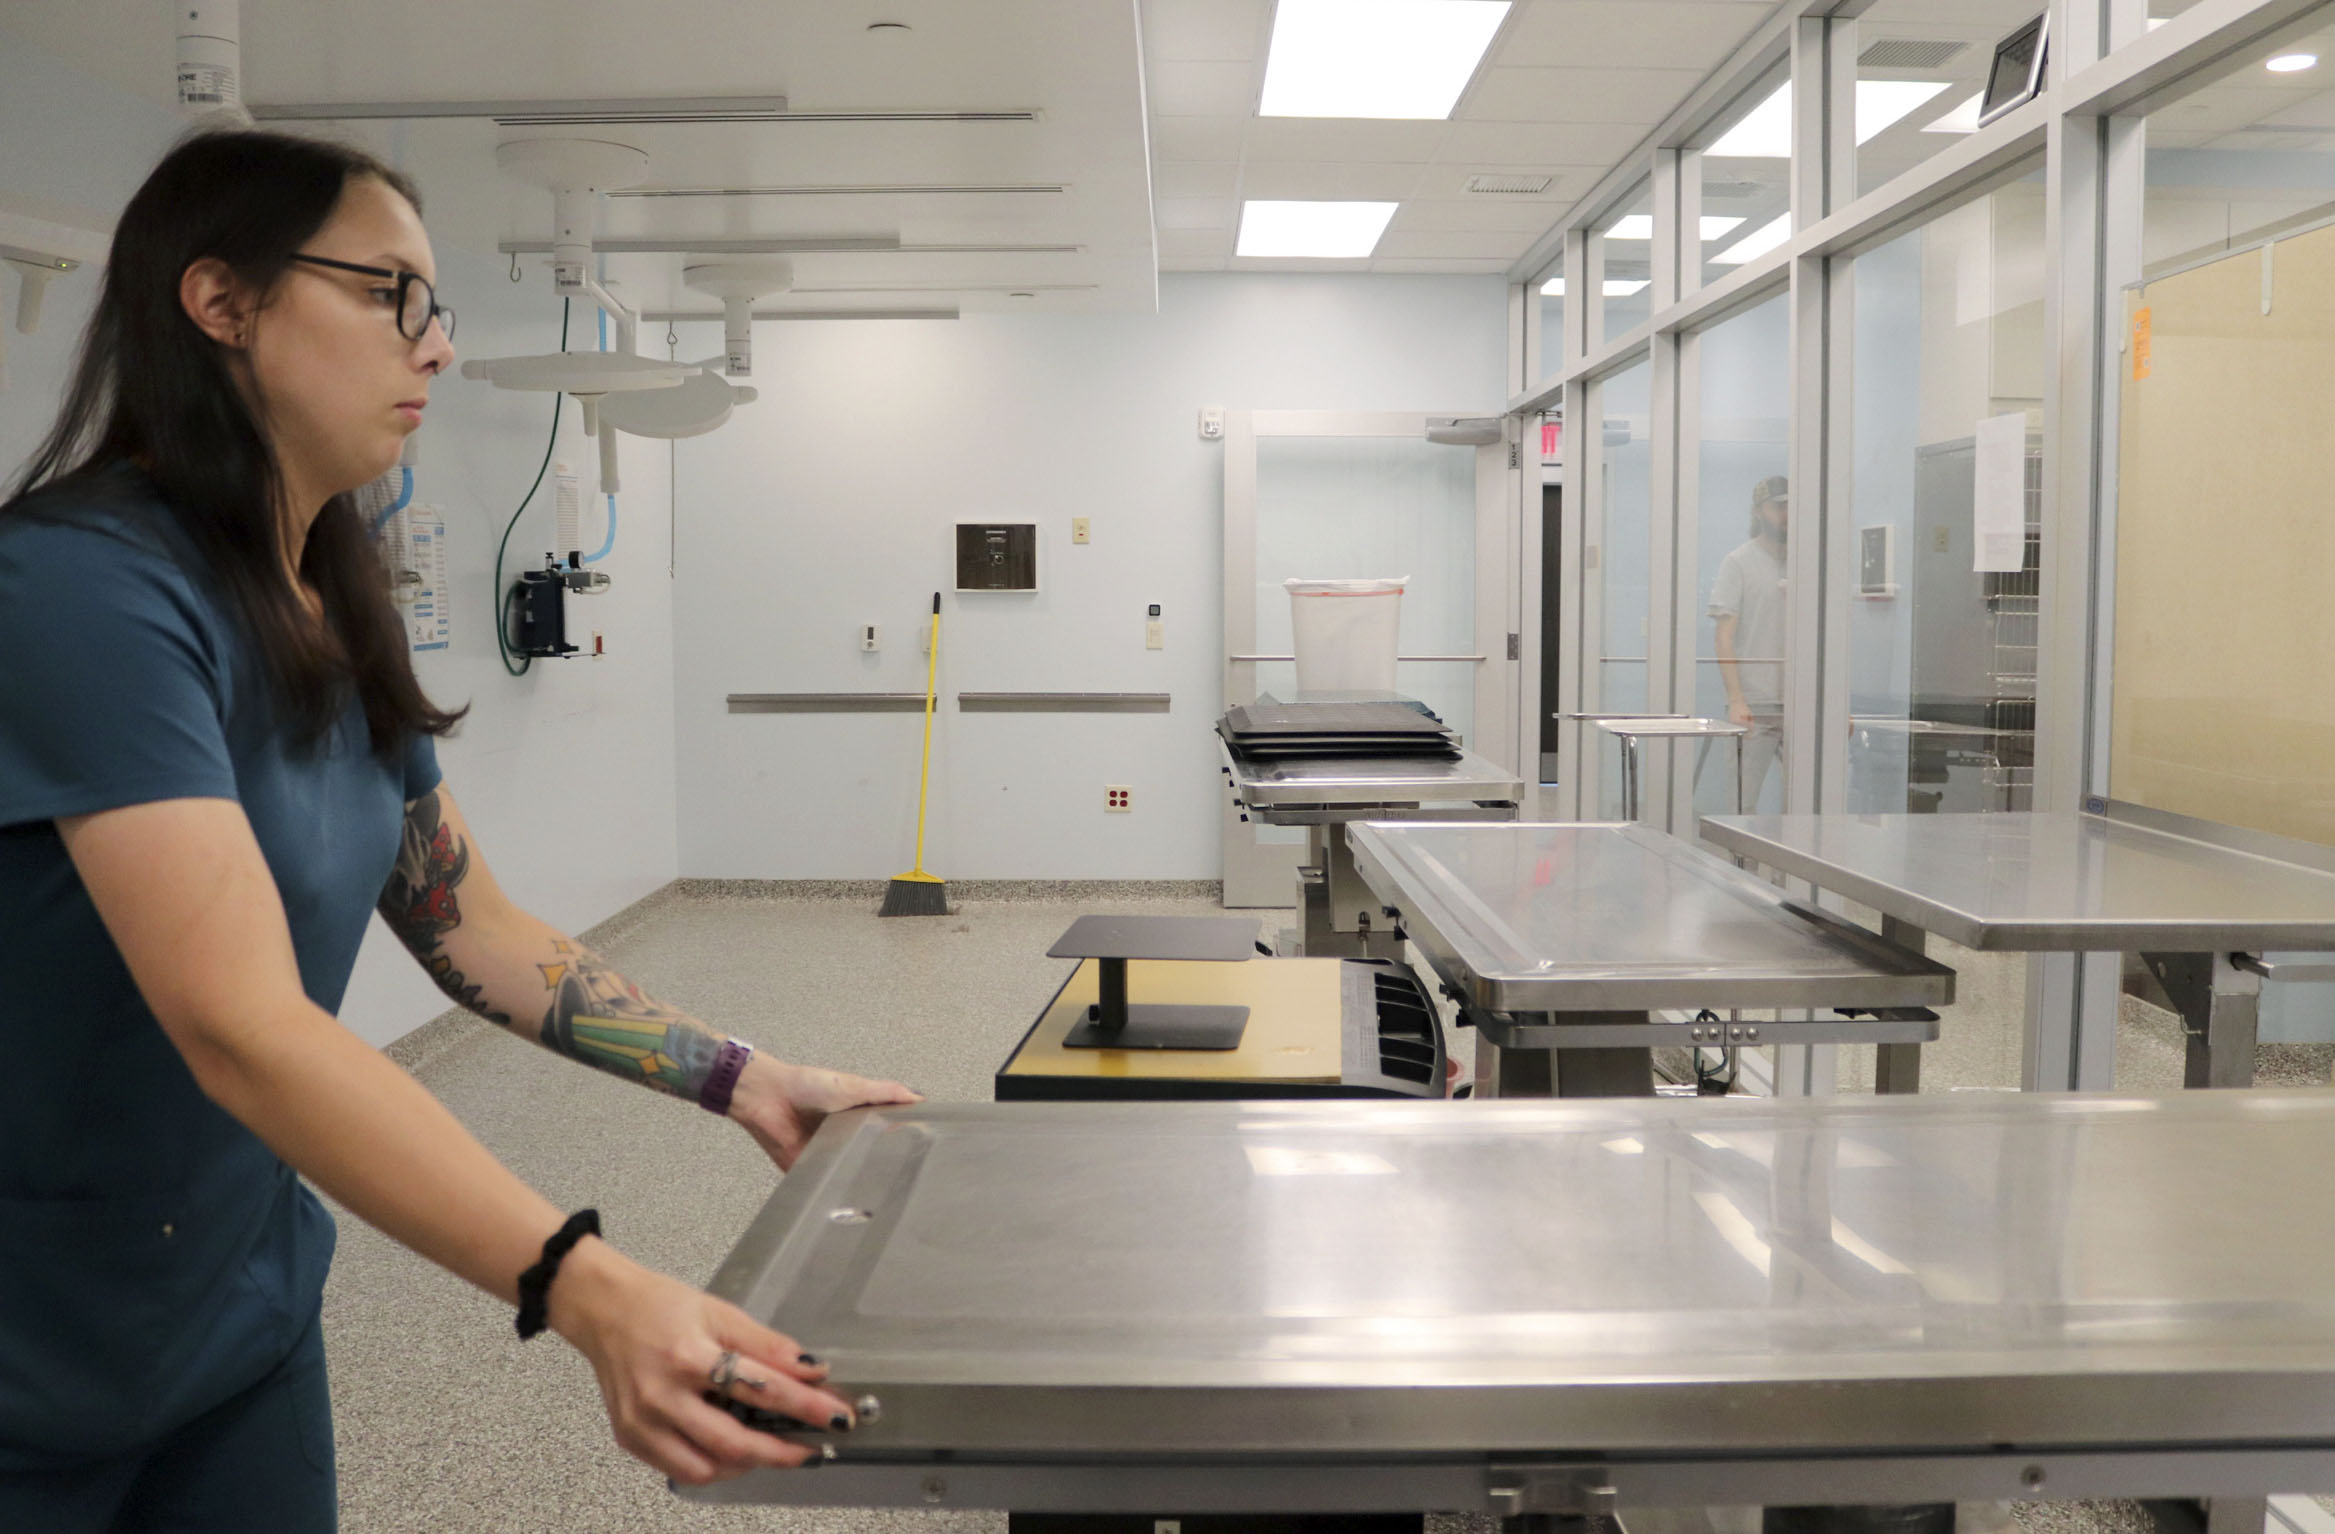 An employee cleans the surgical room on Tuesday, Aug. 23, 2022, at Charles and Lynn Zhang Animal Care & Resource Center in Kalamazoo. There are four surgical tables, allowing for multiple surgeries to happen at once.